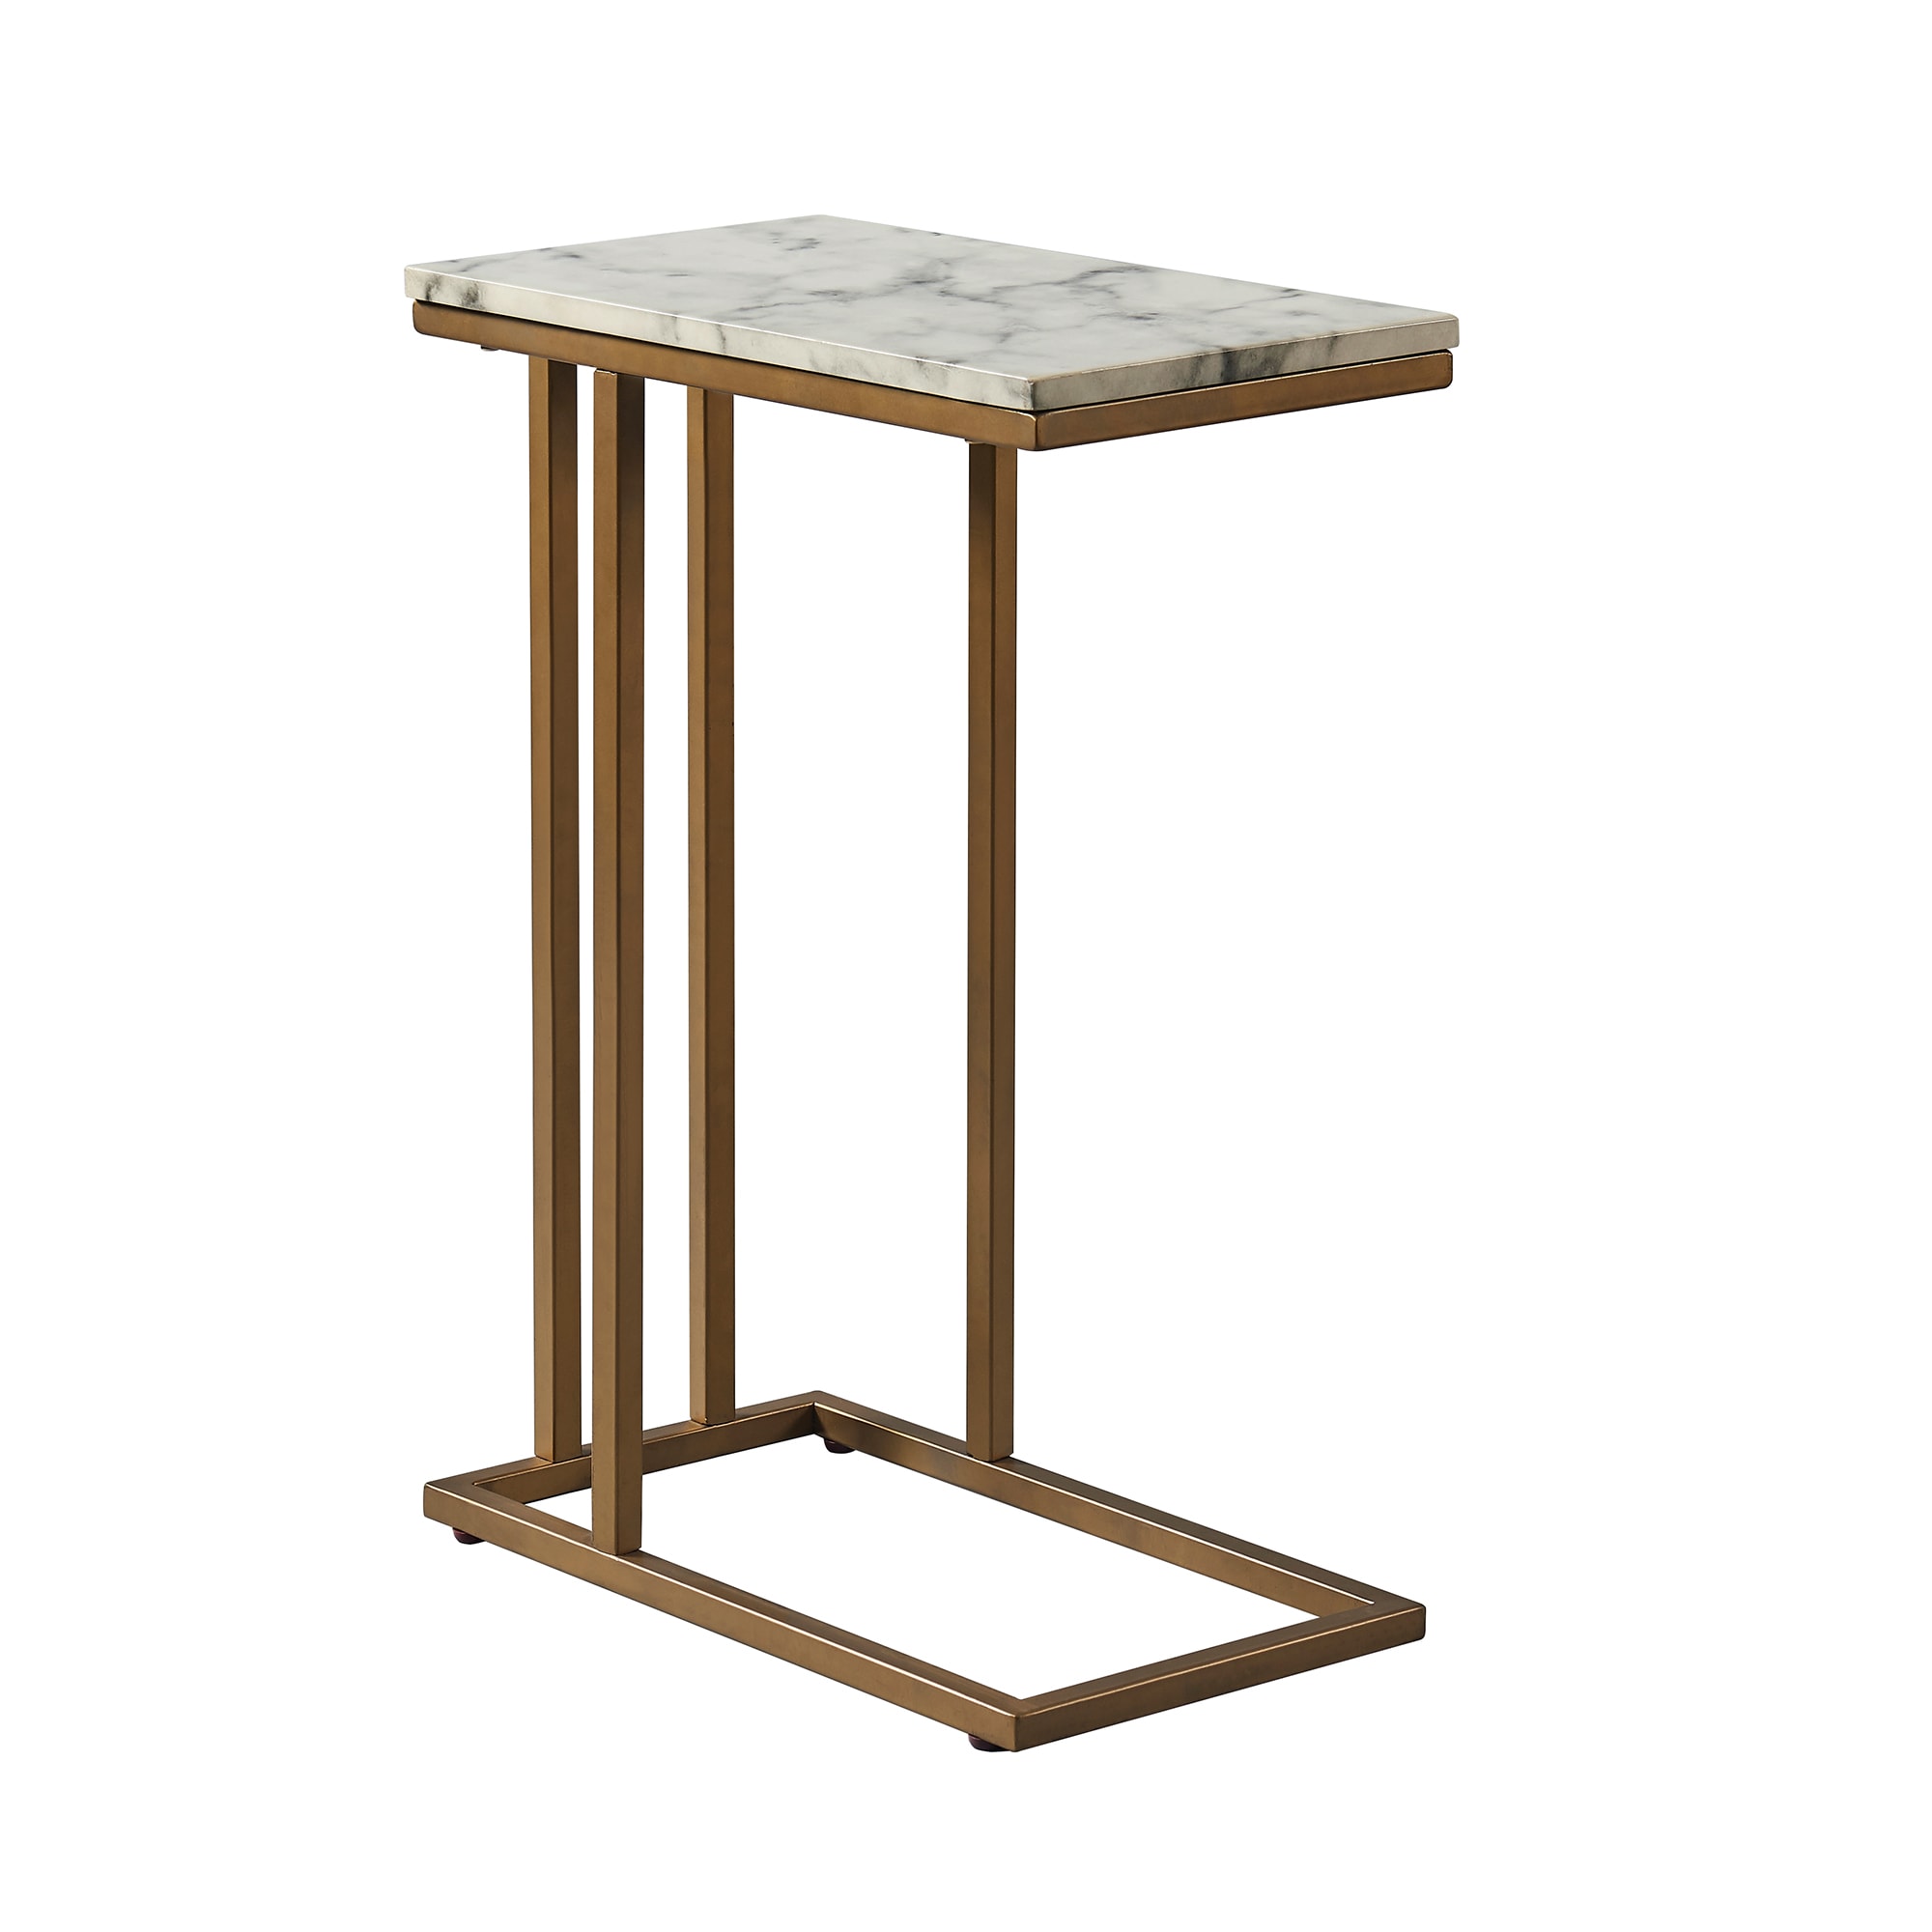 Roar noon Estate Gold Faux marble End Tables at Lowes.com